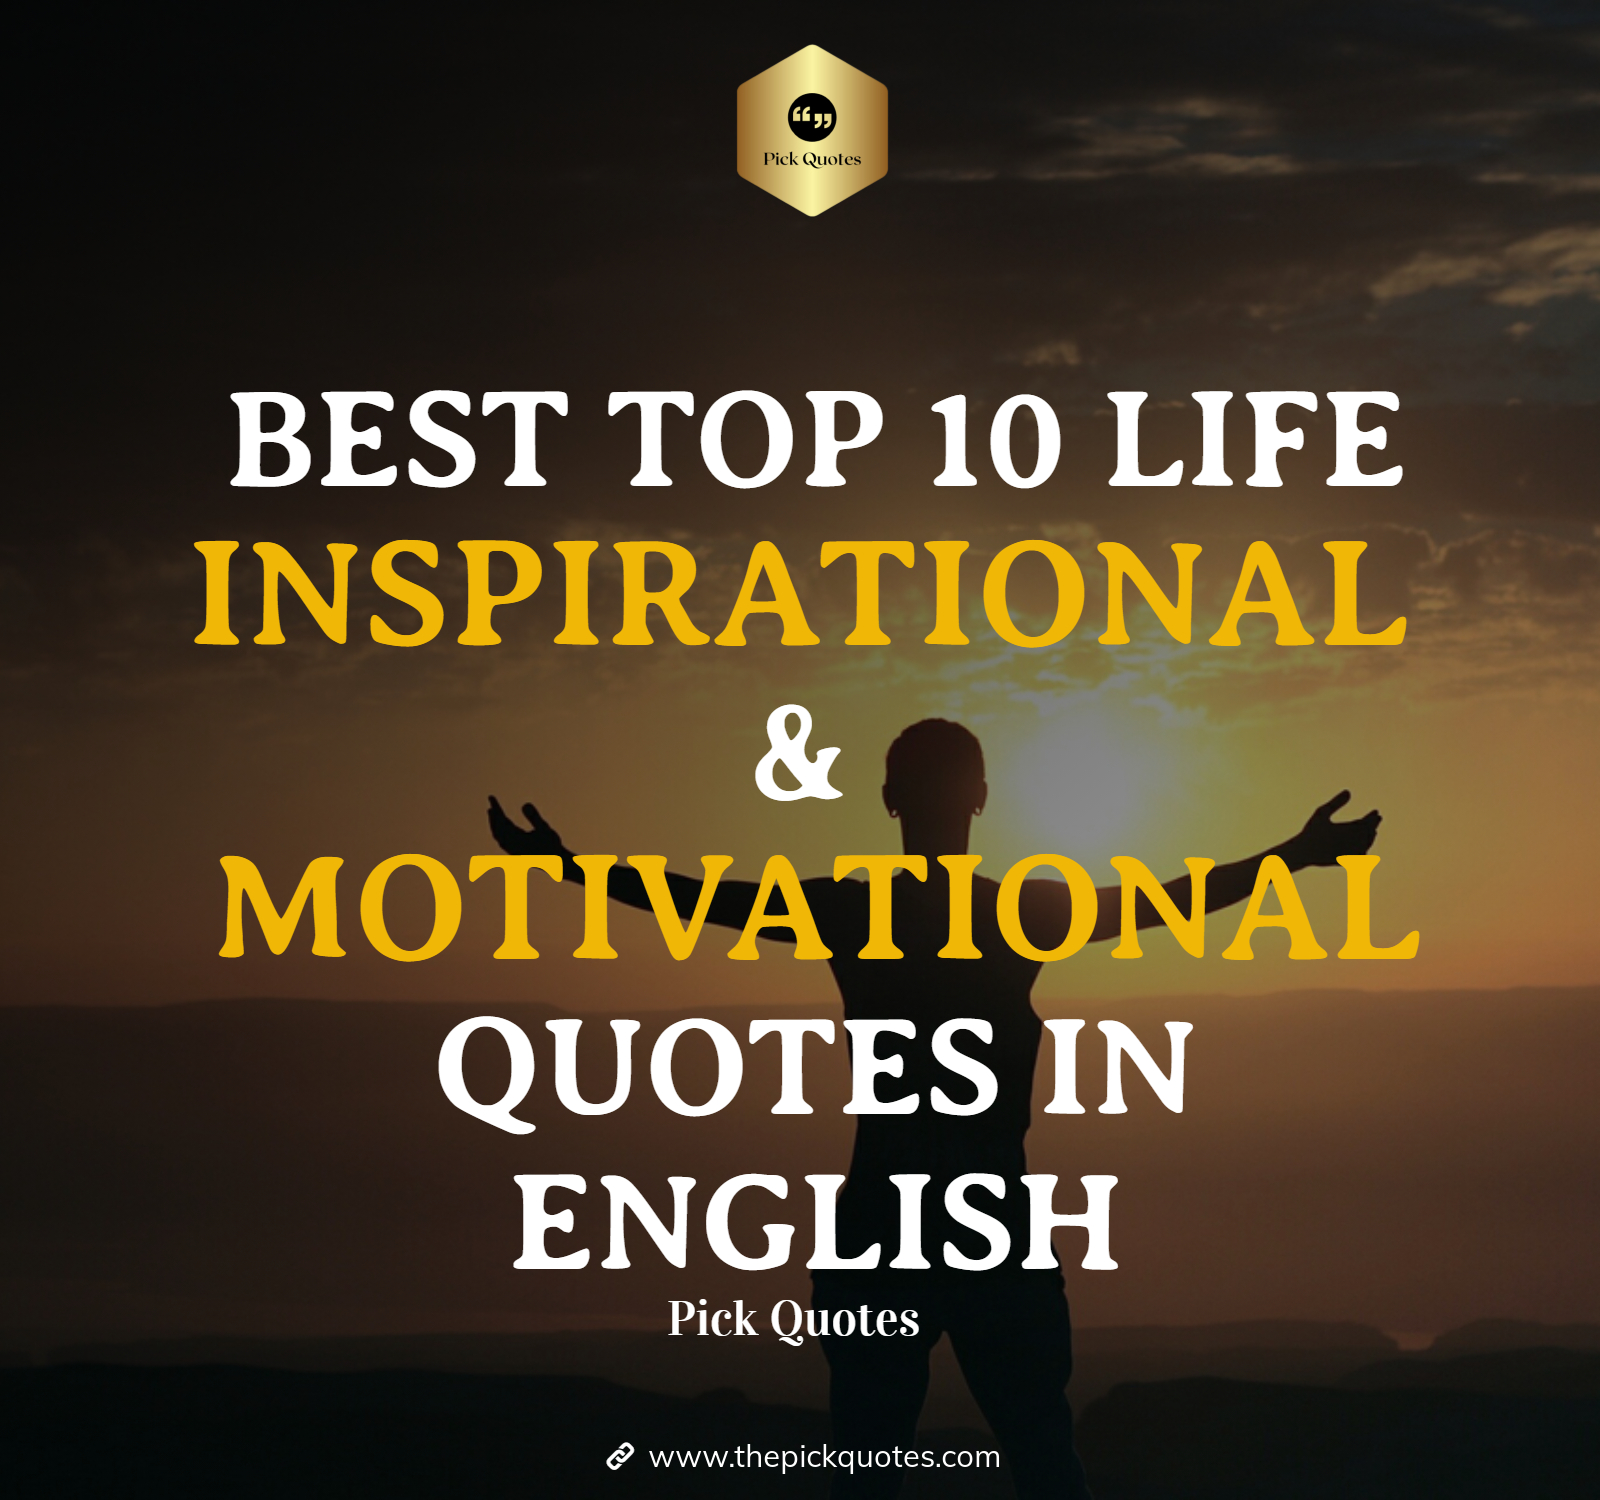 Best Top 10 Life Inspirational & Motivational Quotes